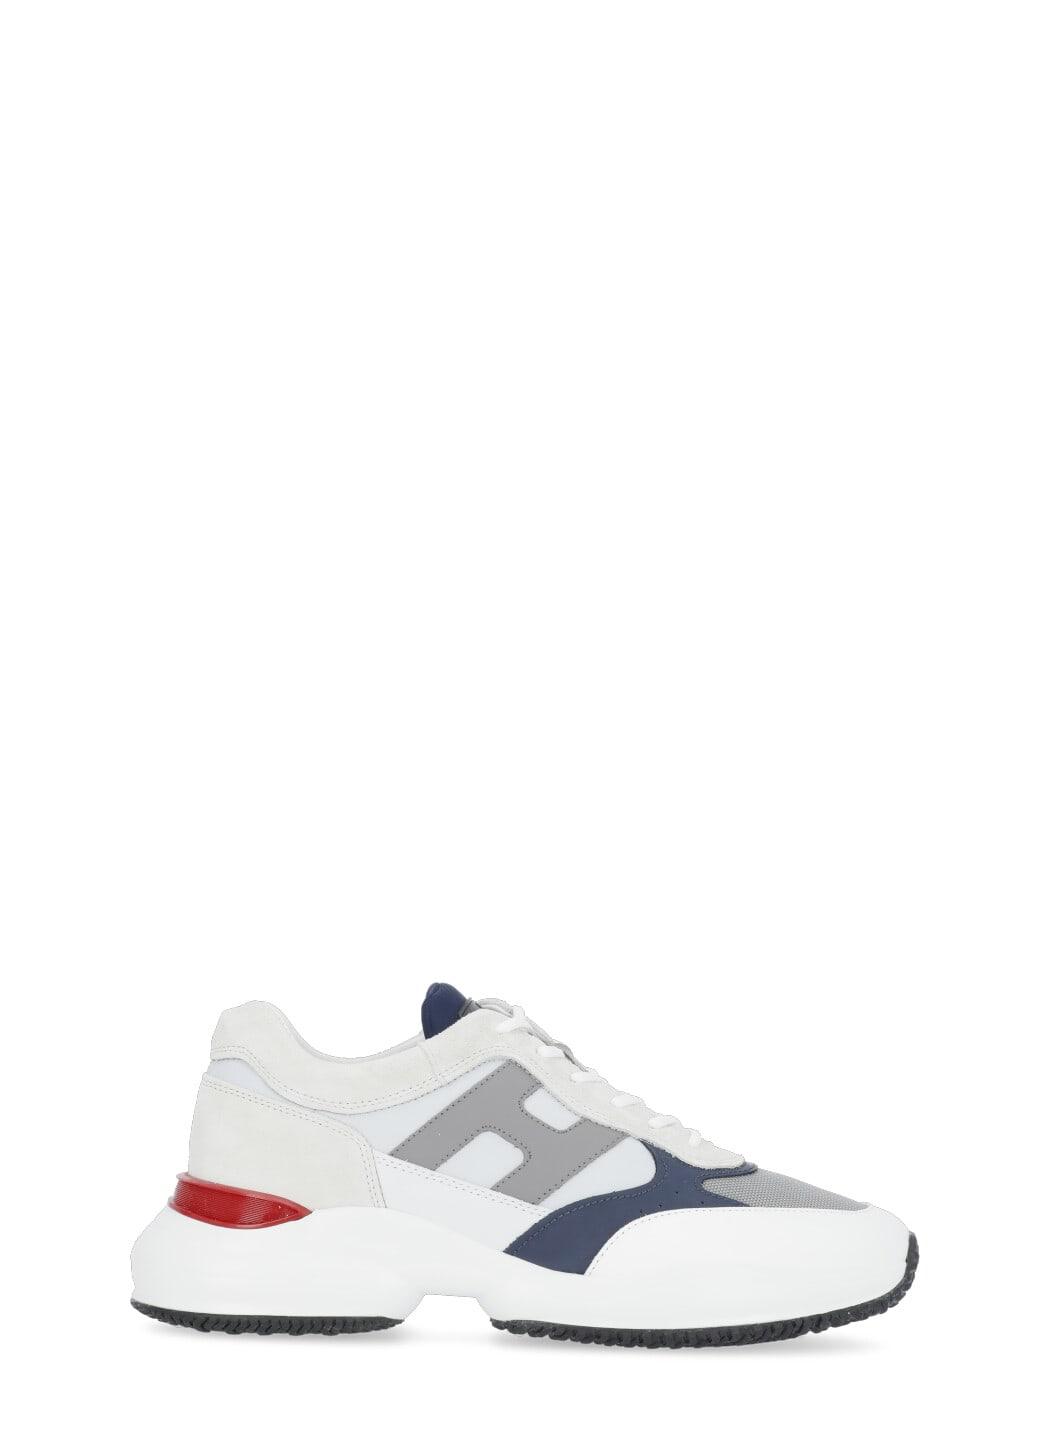 Hogan Interaction Sneakers in White for Men | Lyst